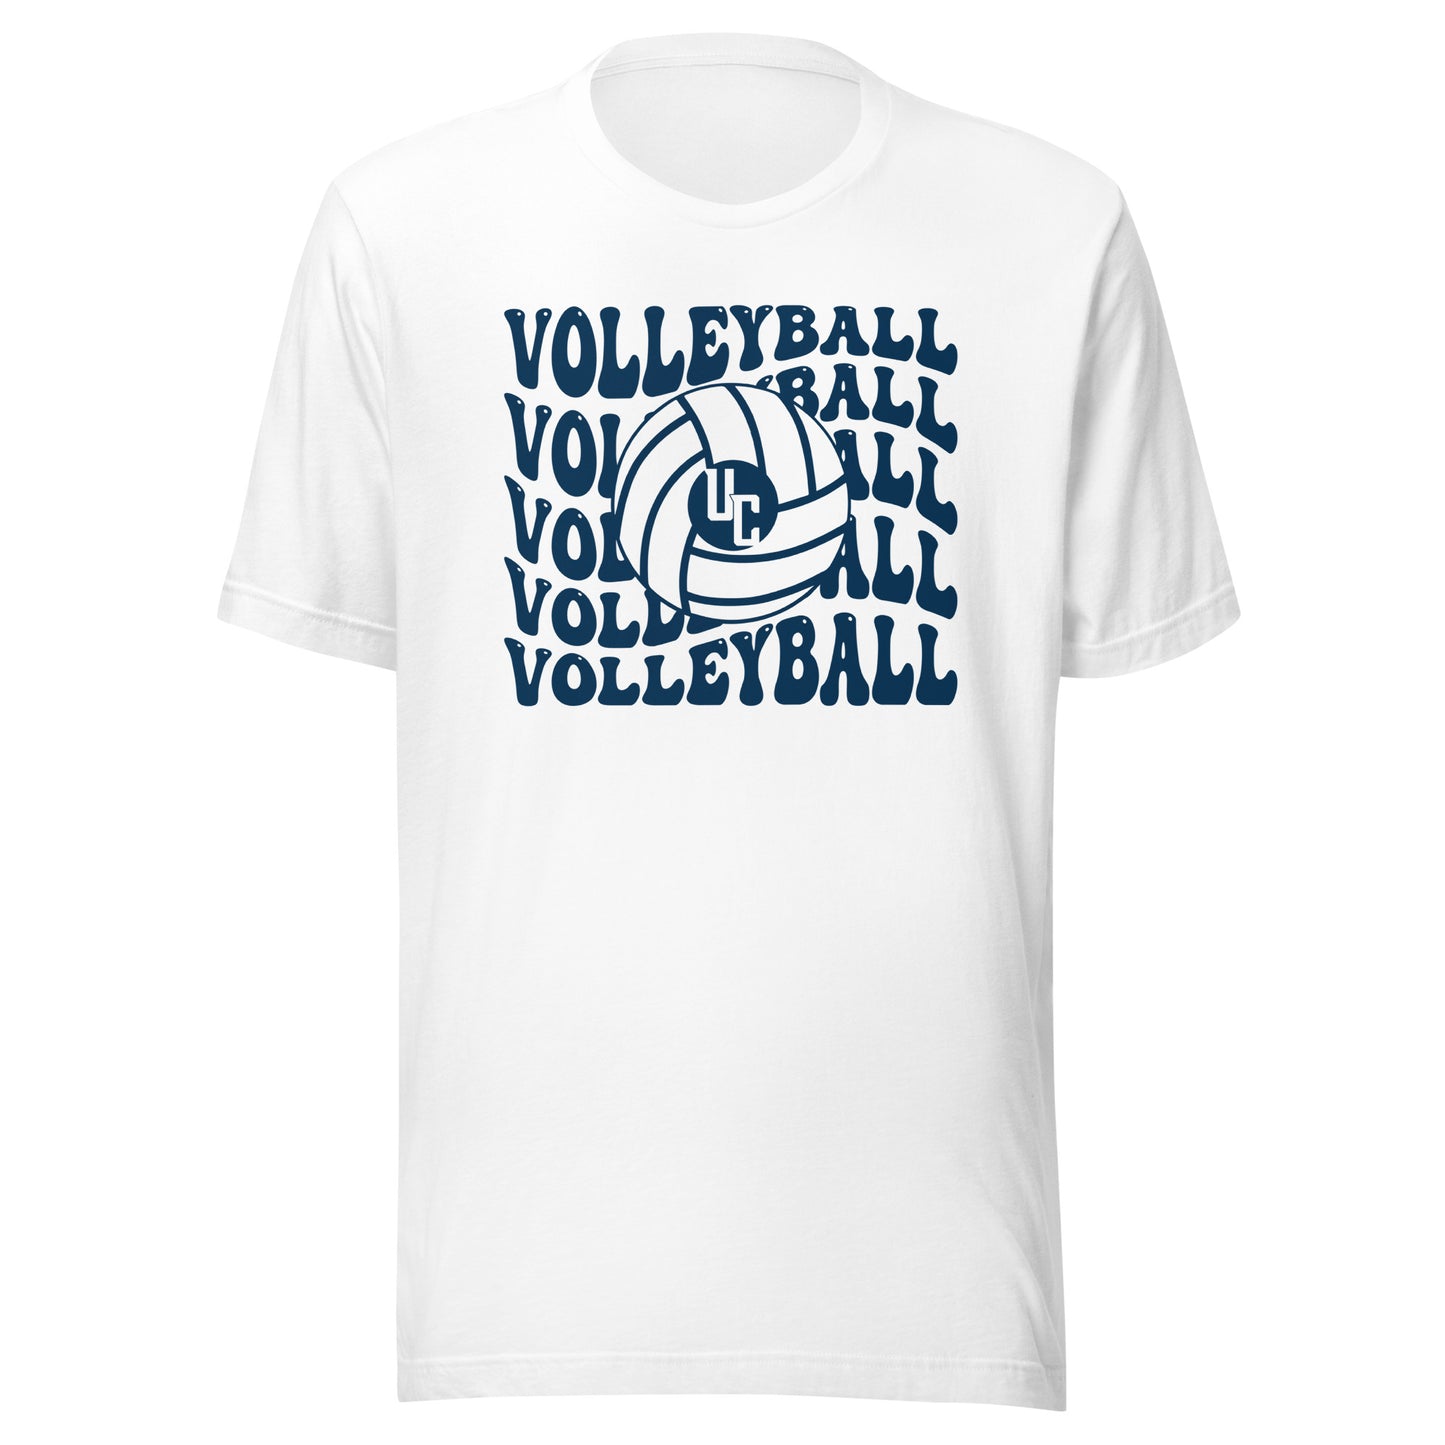 Groovy Volleyball T-Shirt